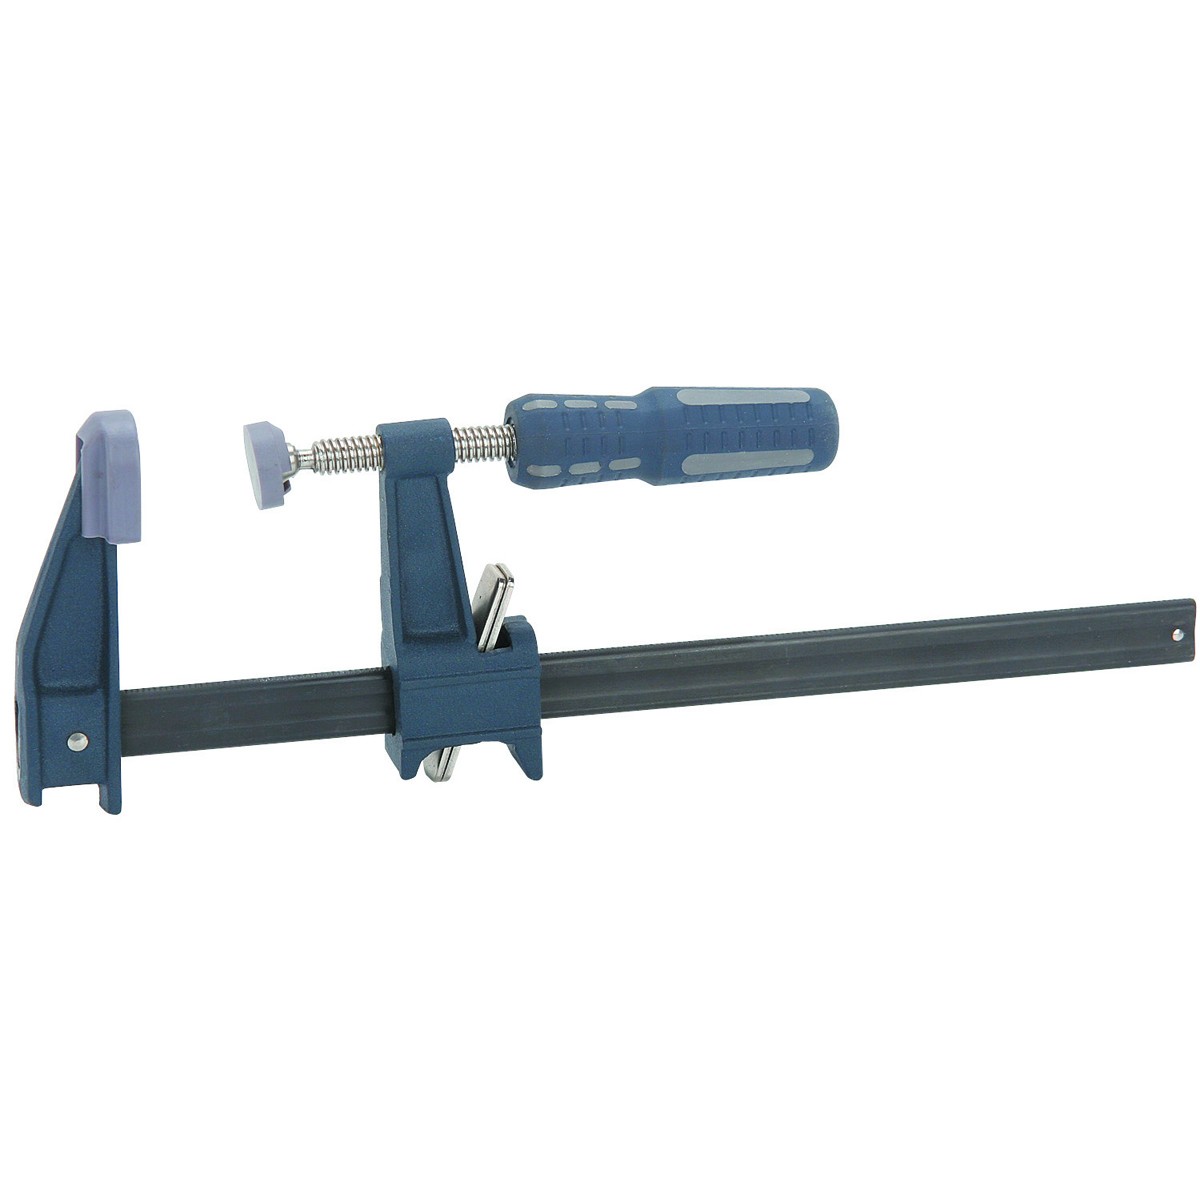 New   Pittsburgh  6 in. Quick Release Bar Clamp